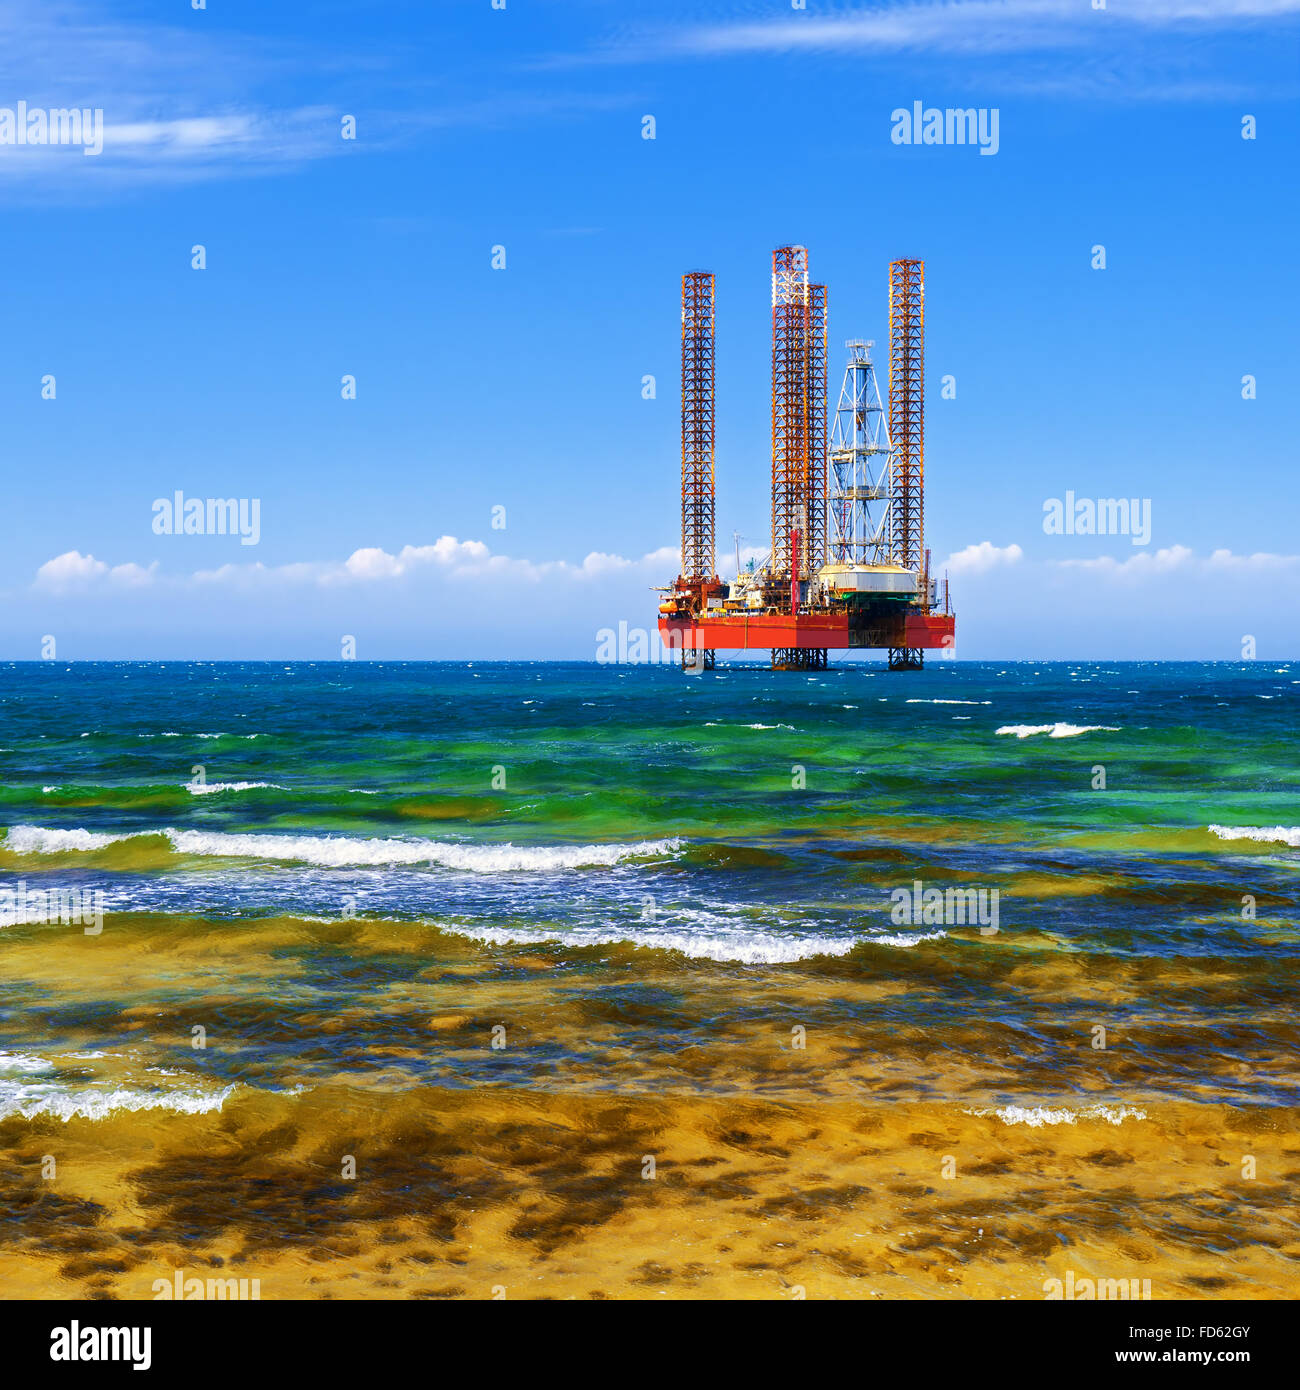 Offshore oil and Gas Production. Drilling platform in the sea against a blue sky Stock Photo